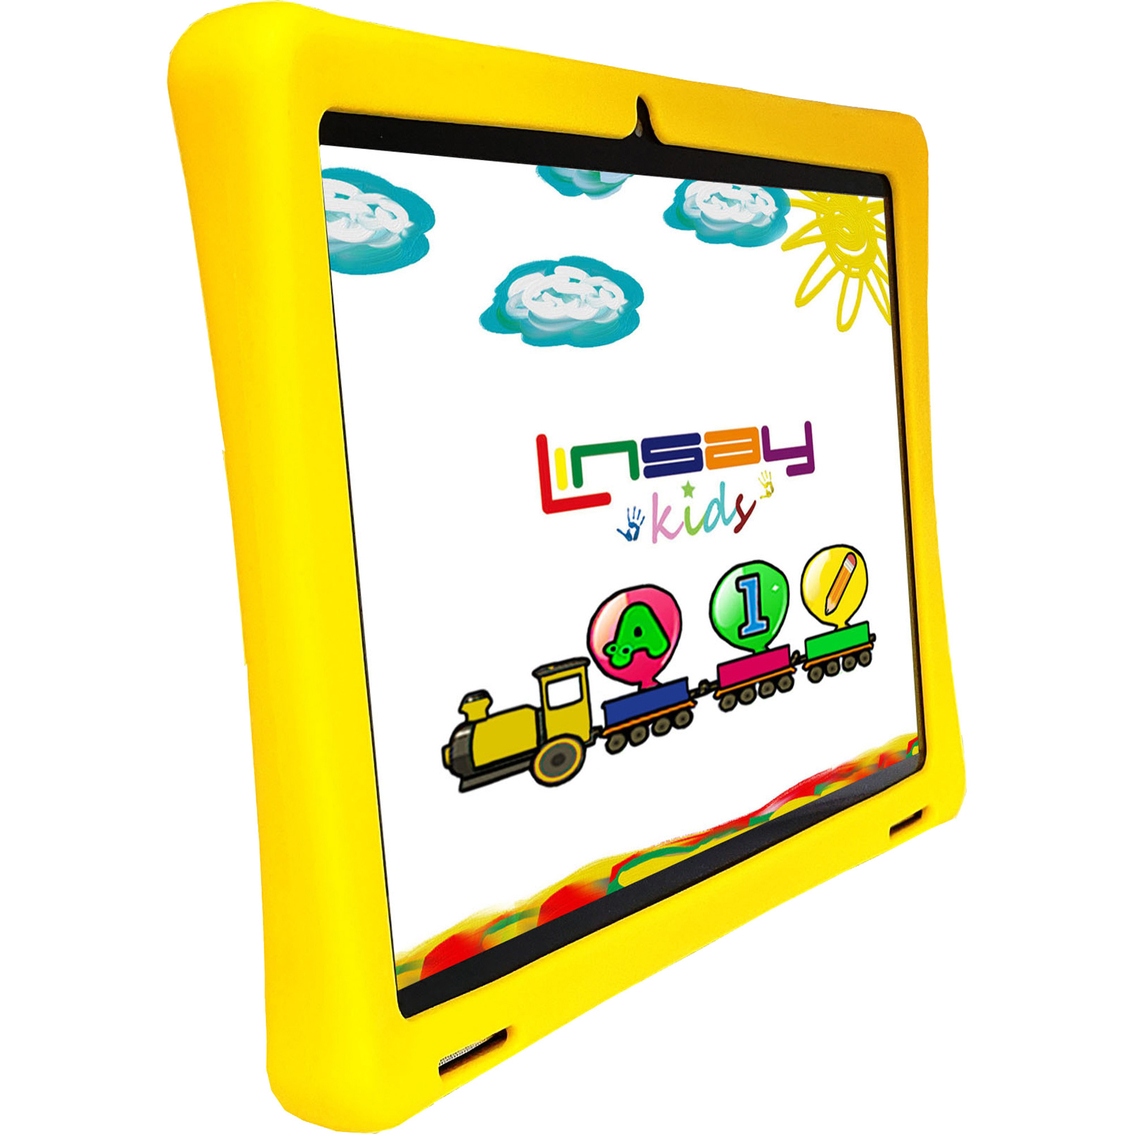 Linsay 10.1 in. 2GB RAM 32GB Tablet with Kids Case, Holder and Pen Bundle - Image 3 of 3